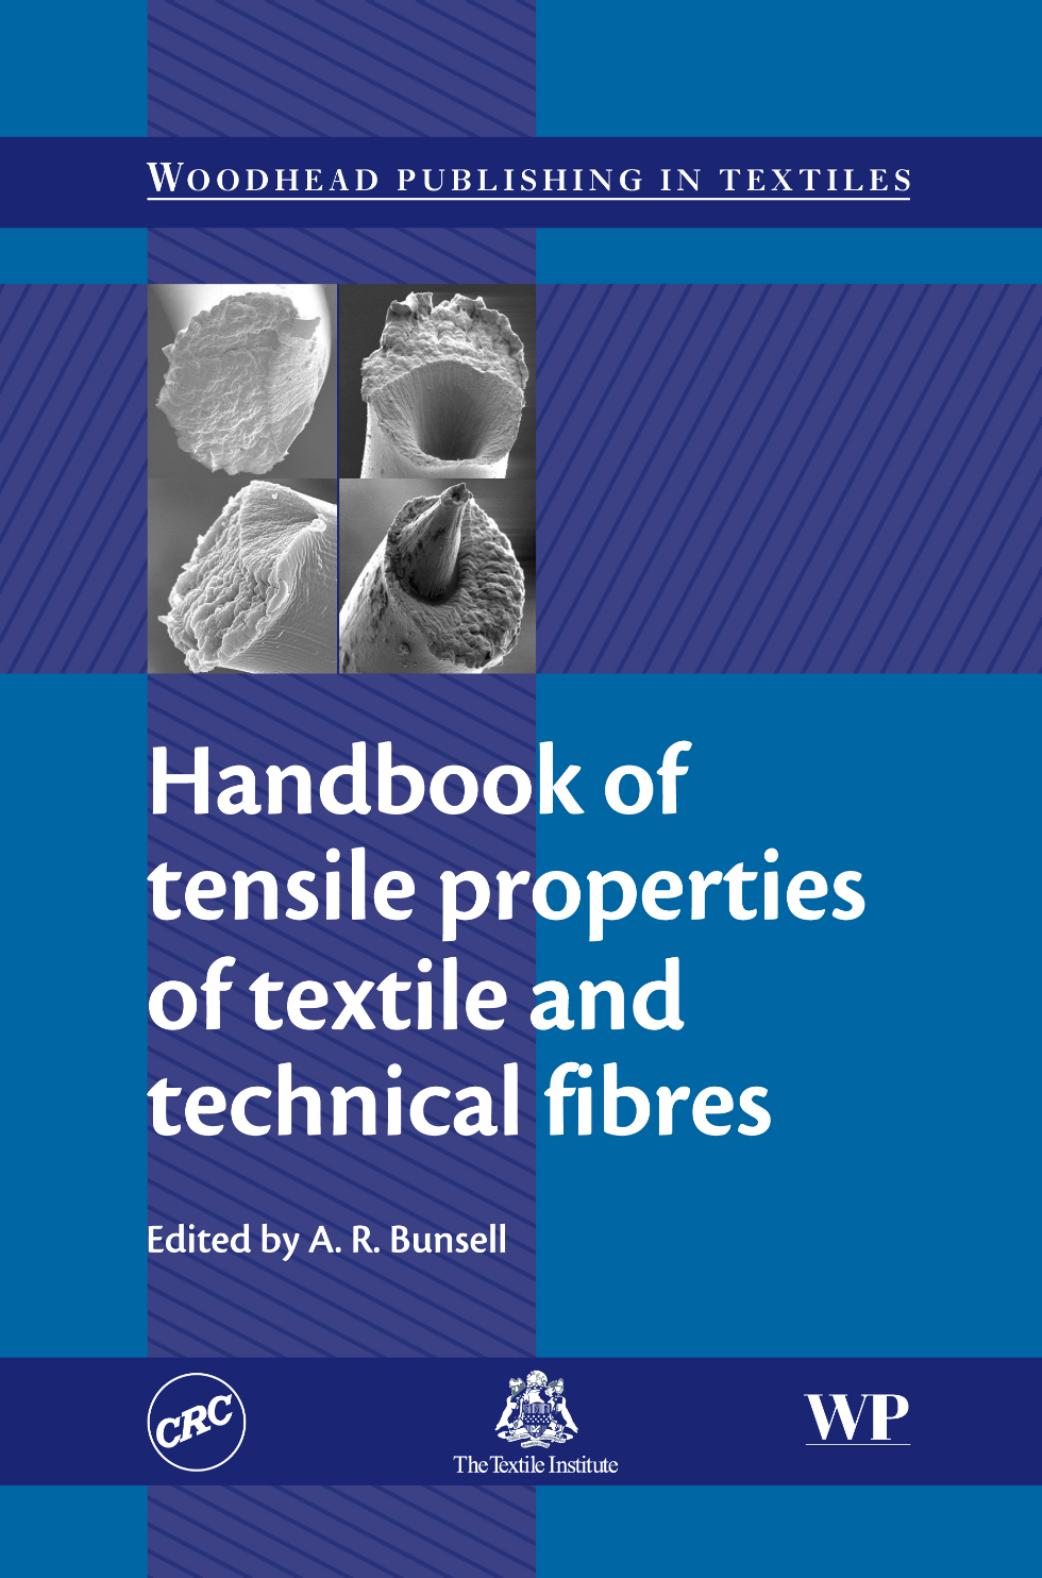 Handbook of Tensile Properties of Textile and Technical Fibres (Woodhead Publishing Series in Textiles 2009